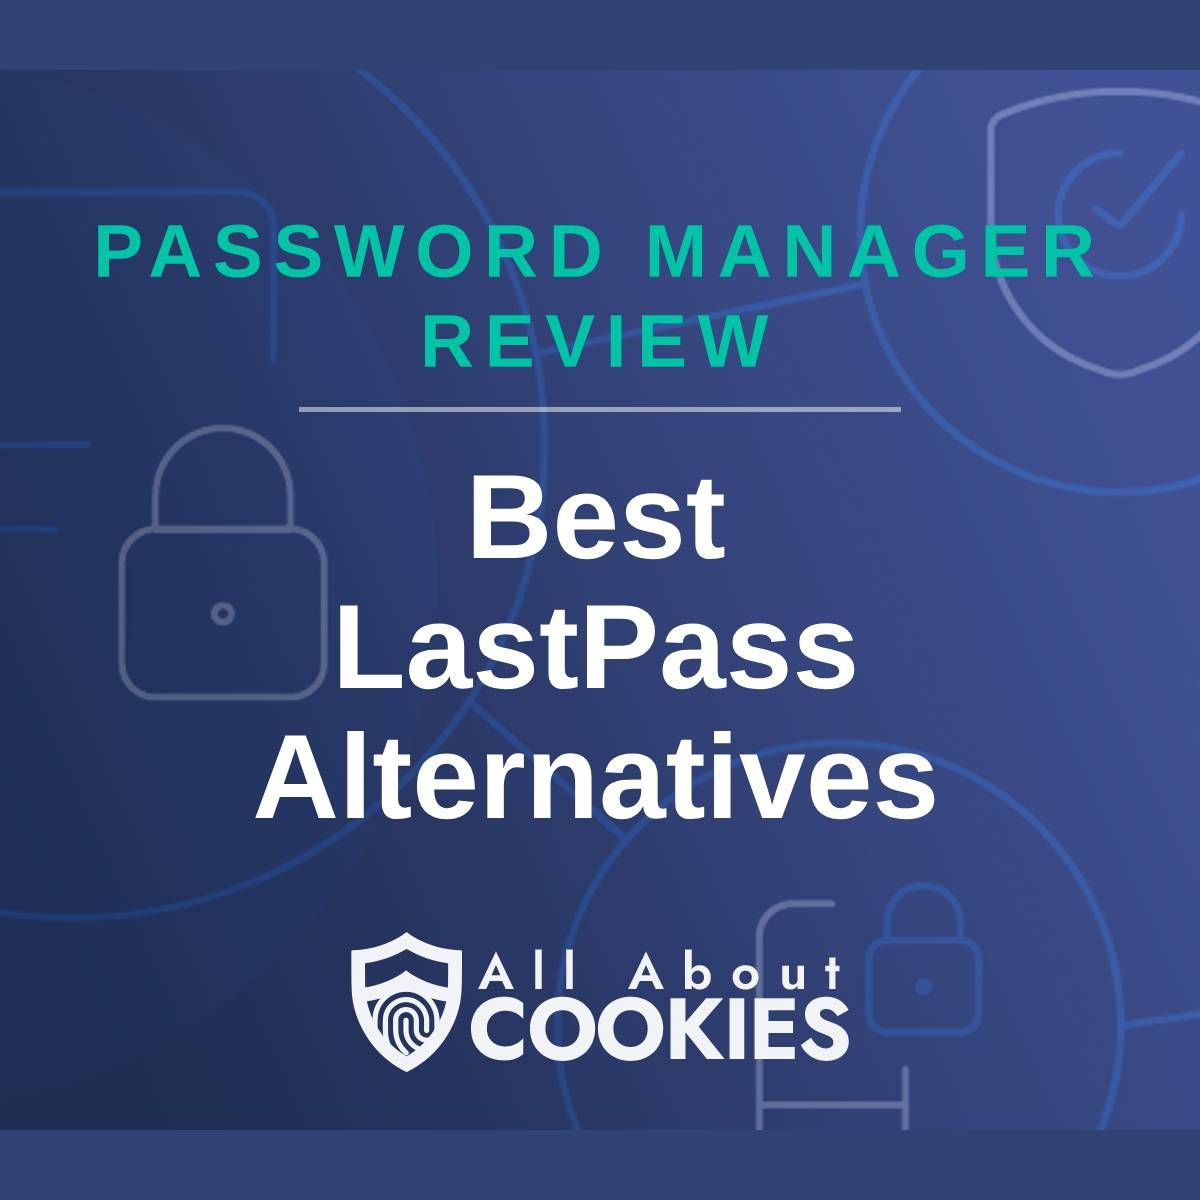 A blue background with images of locks and shields with the text &quot;Password Manager Review Best LastPass Alternatives&quot; and the All About Cookies logo. 